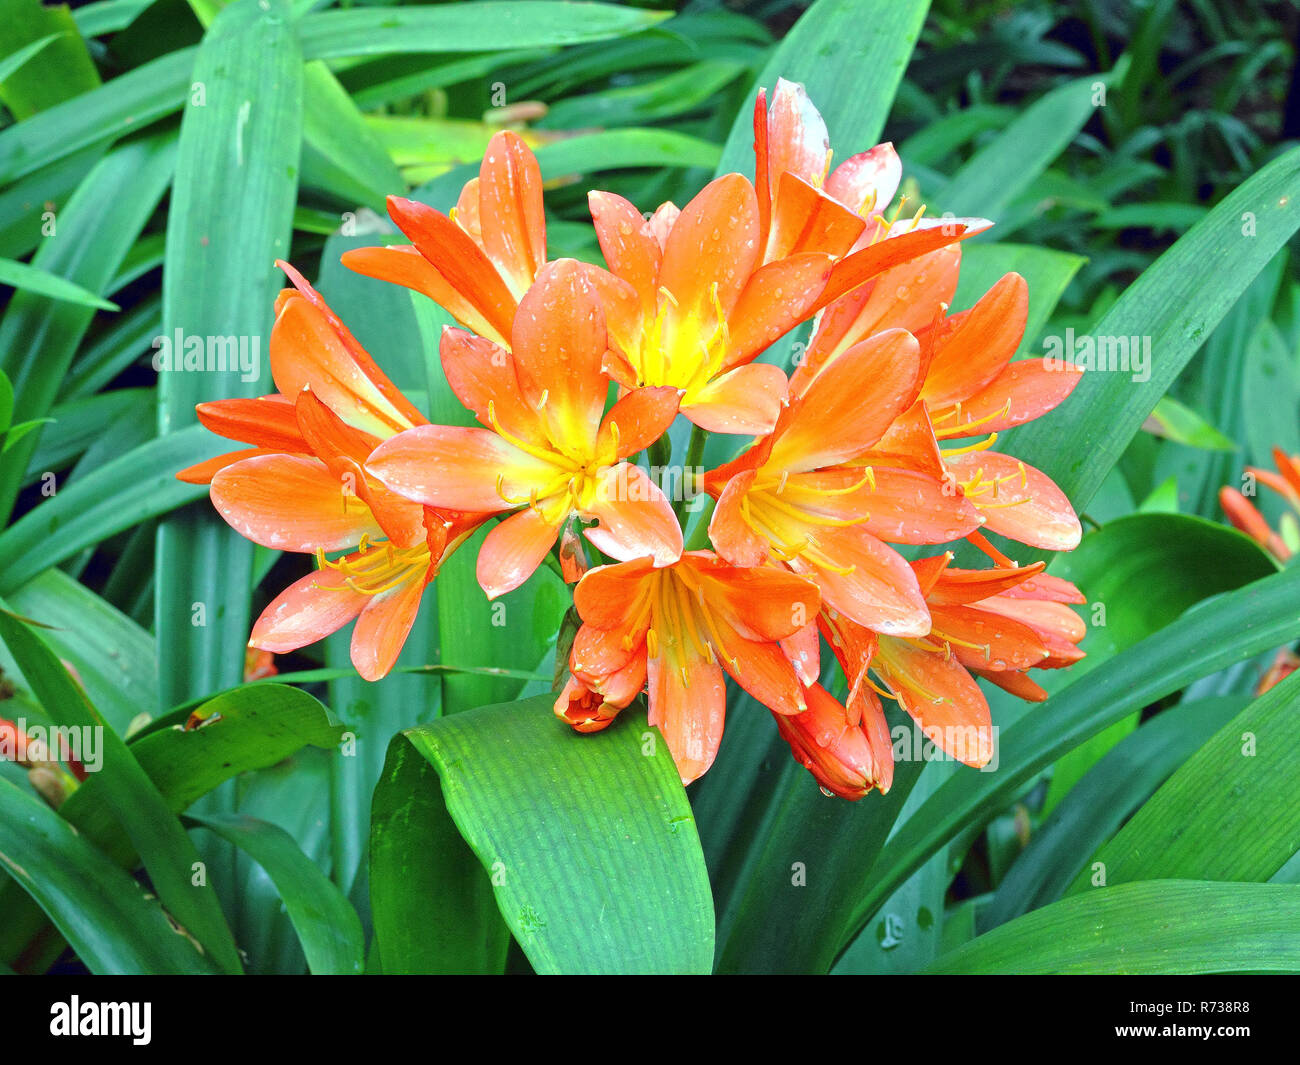 Cluster of orange Clivia flowers in rain, Clivia miniata, also called Natal lily Stock Photo